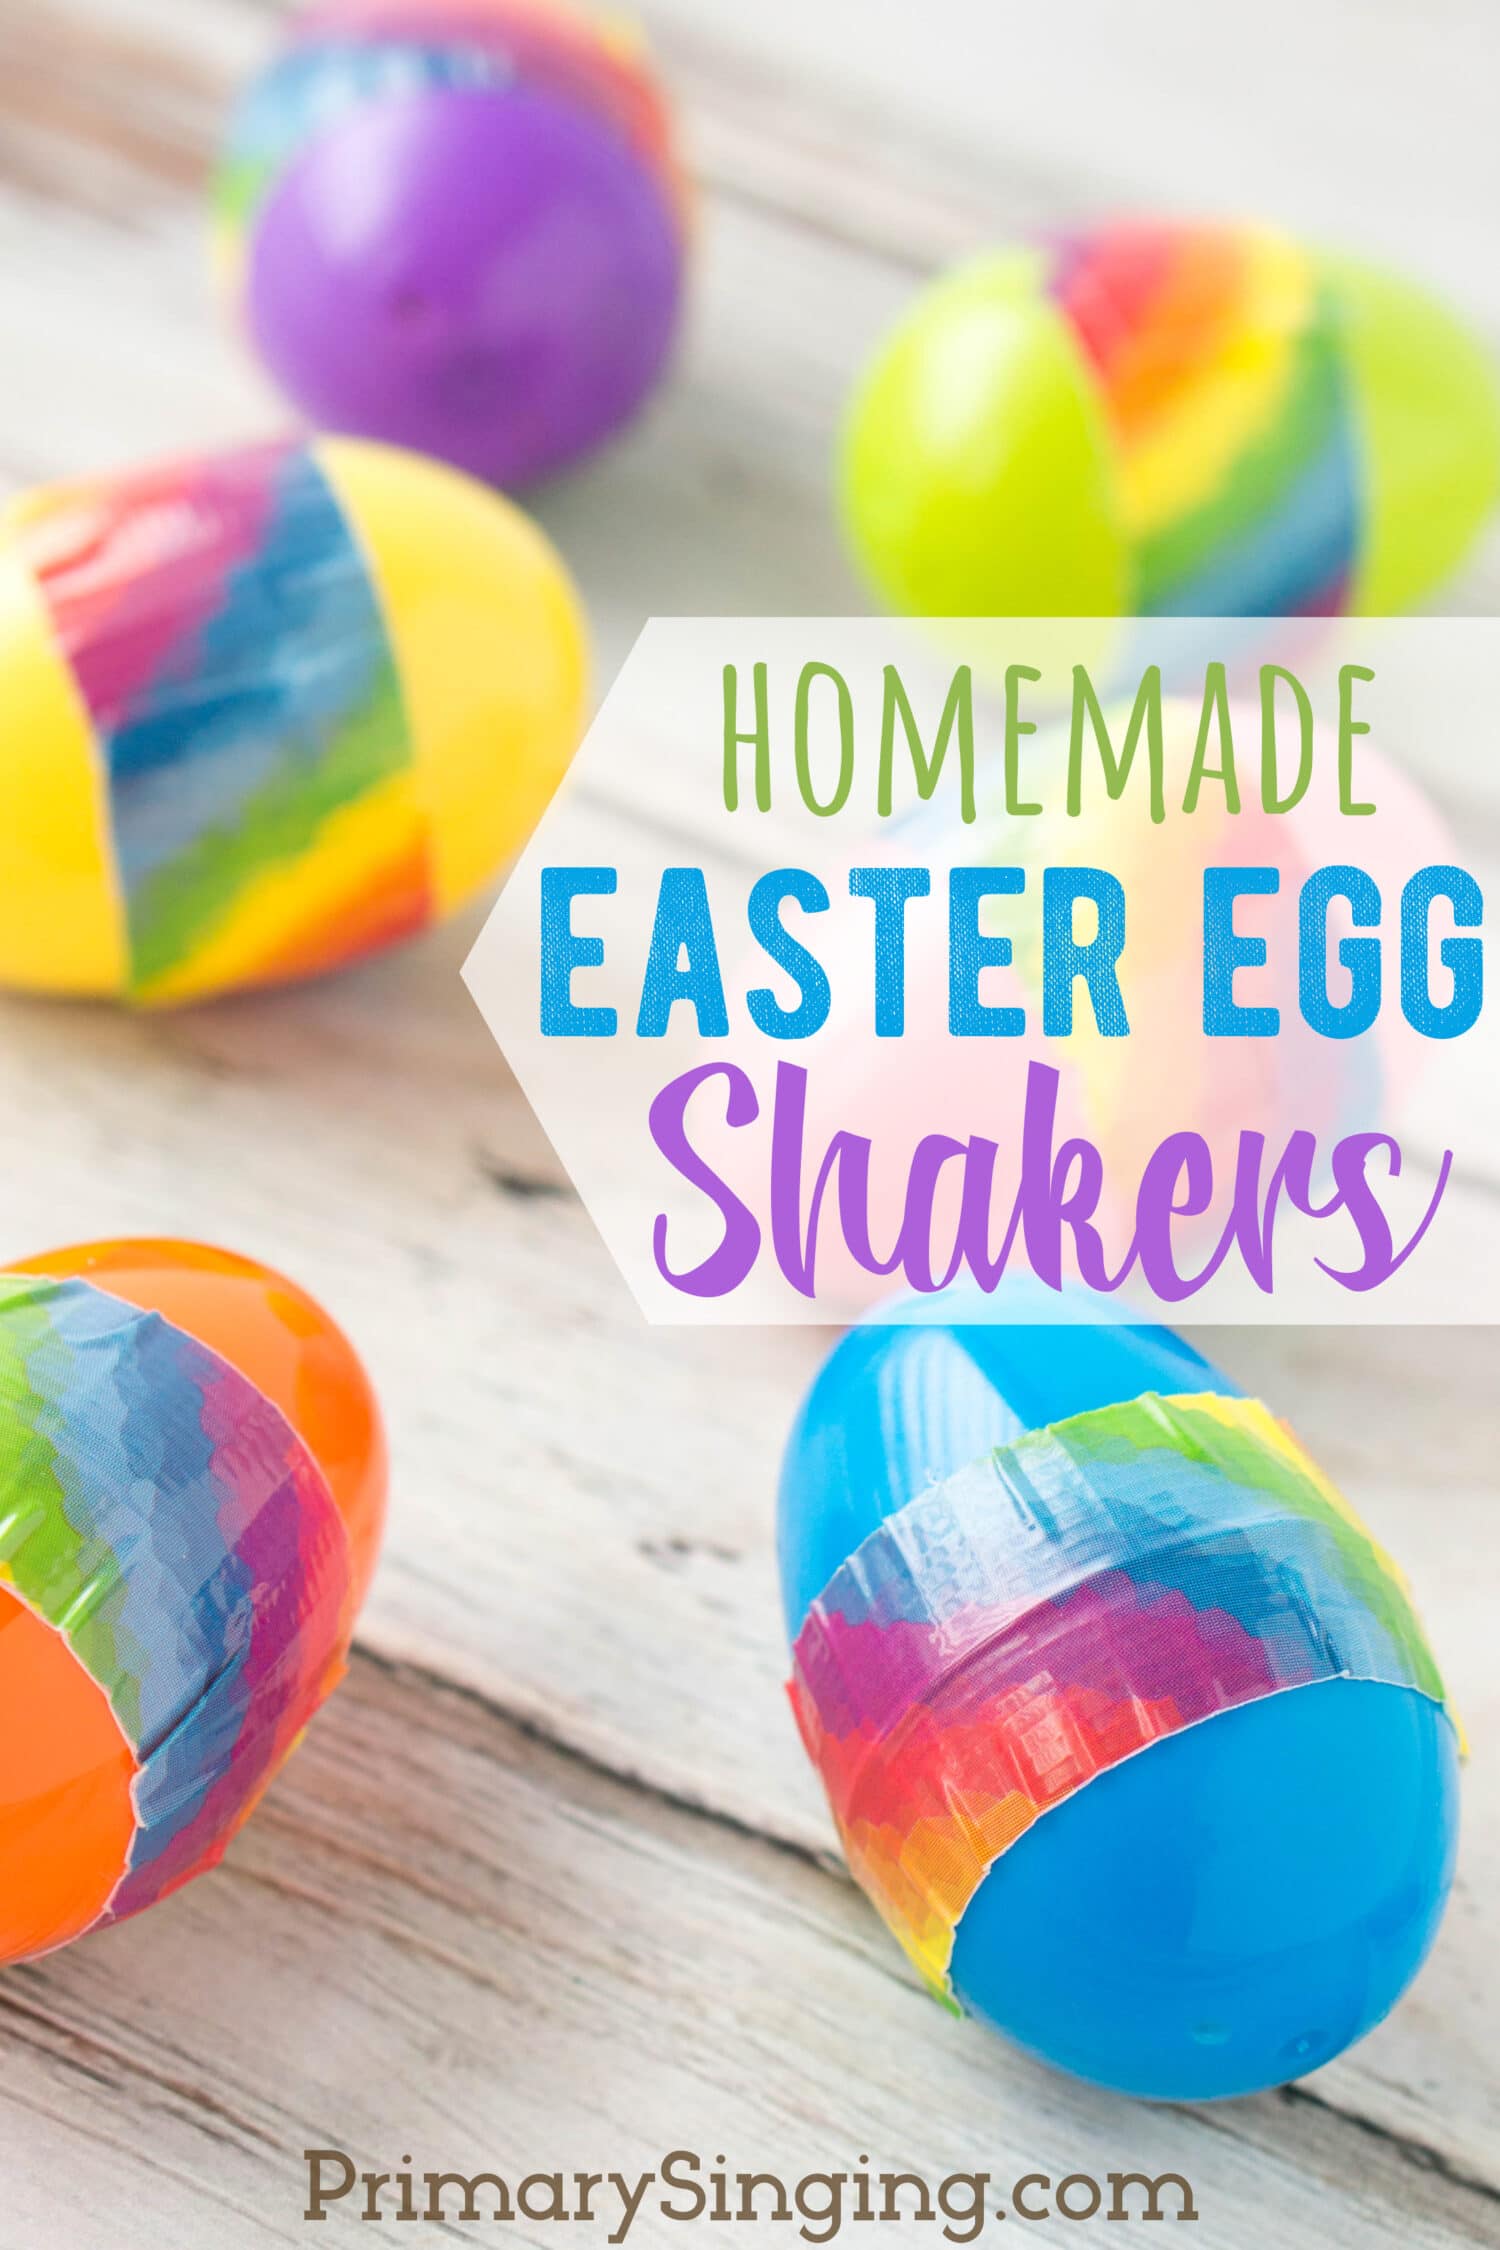 How to Make Egg Shakers Instruments - Step-by-step easy tutorial for making homemade egg shaker for music time or Singing Time. Designed by an LDS Primary Music Leader working with toddler, preschool, and middle grade kids learning music theory and songs!